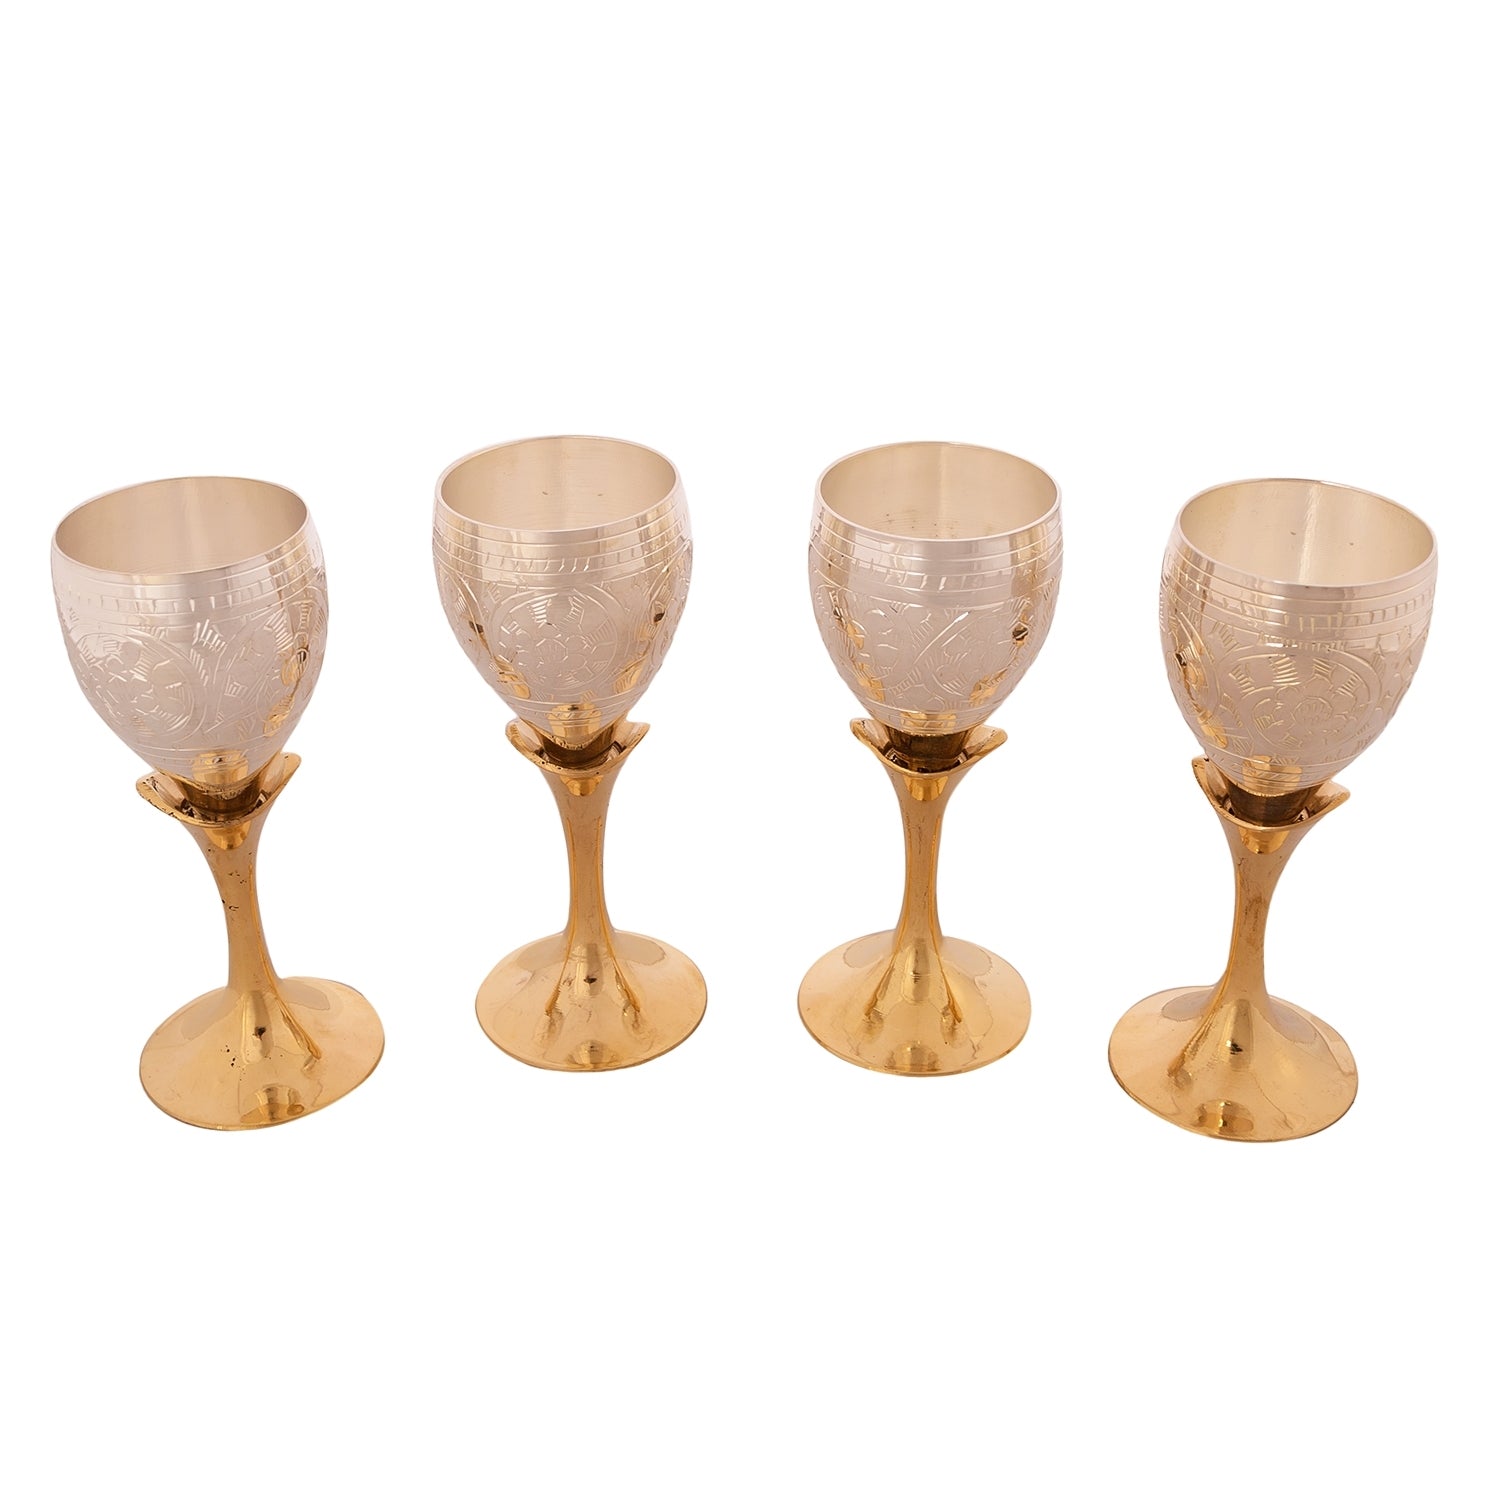 German Silver Wine Glass Set of 4 with Velvet Box 1